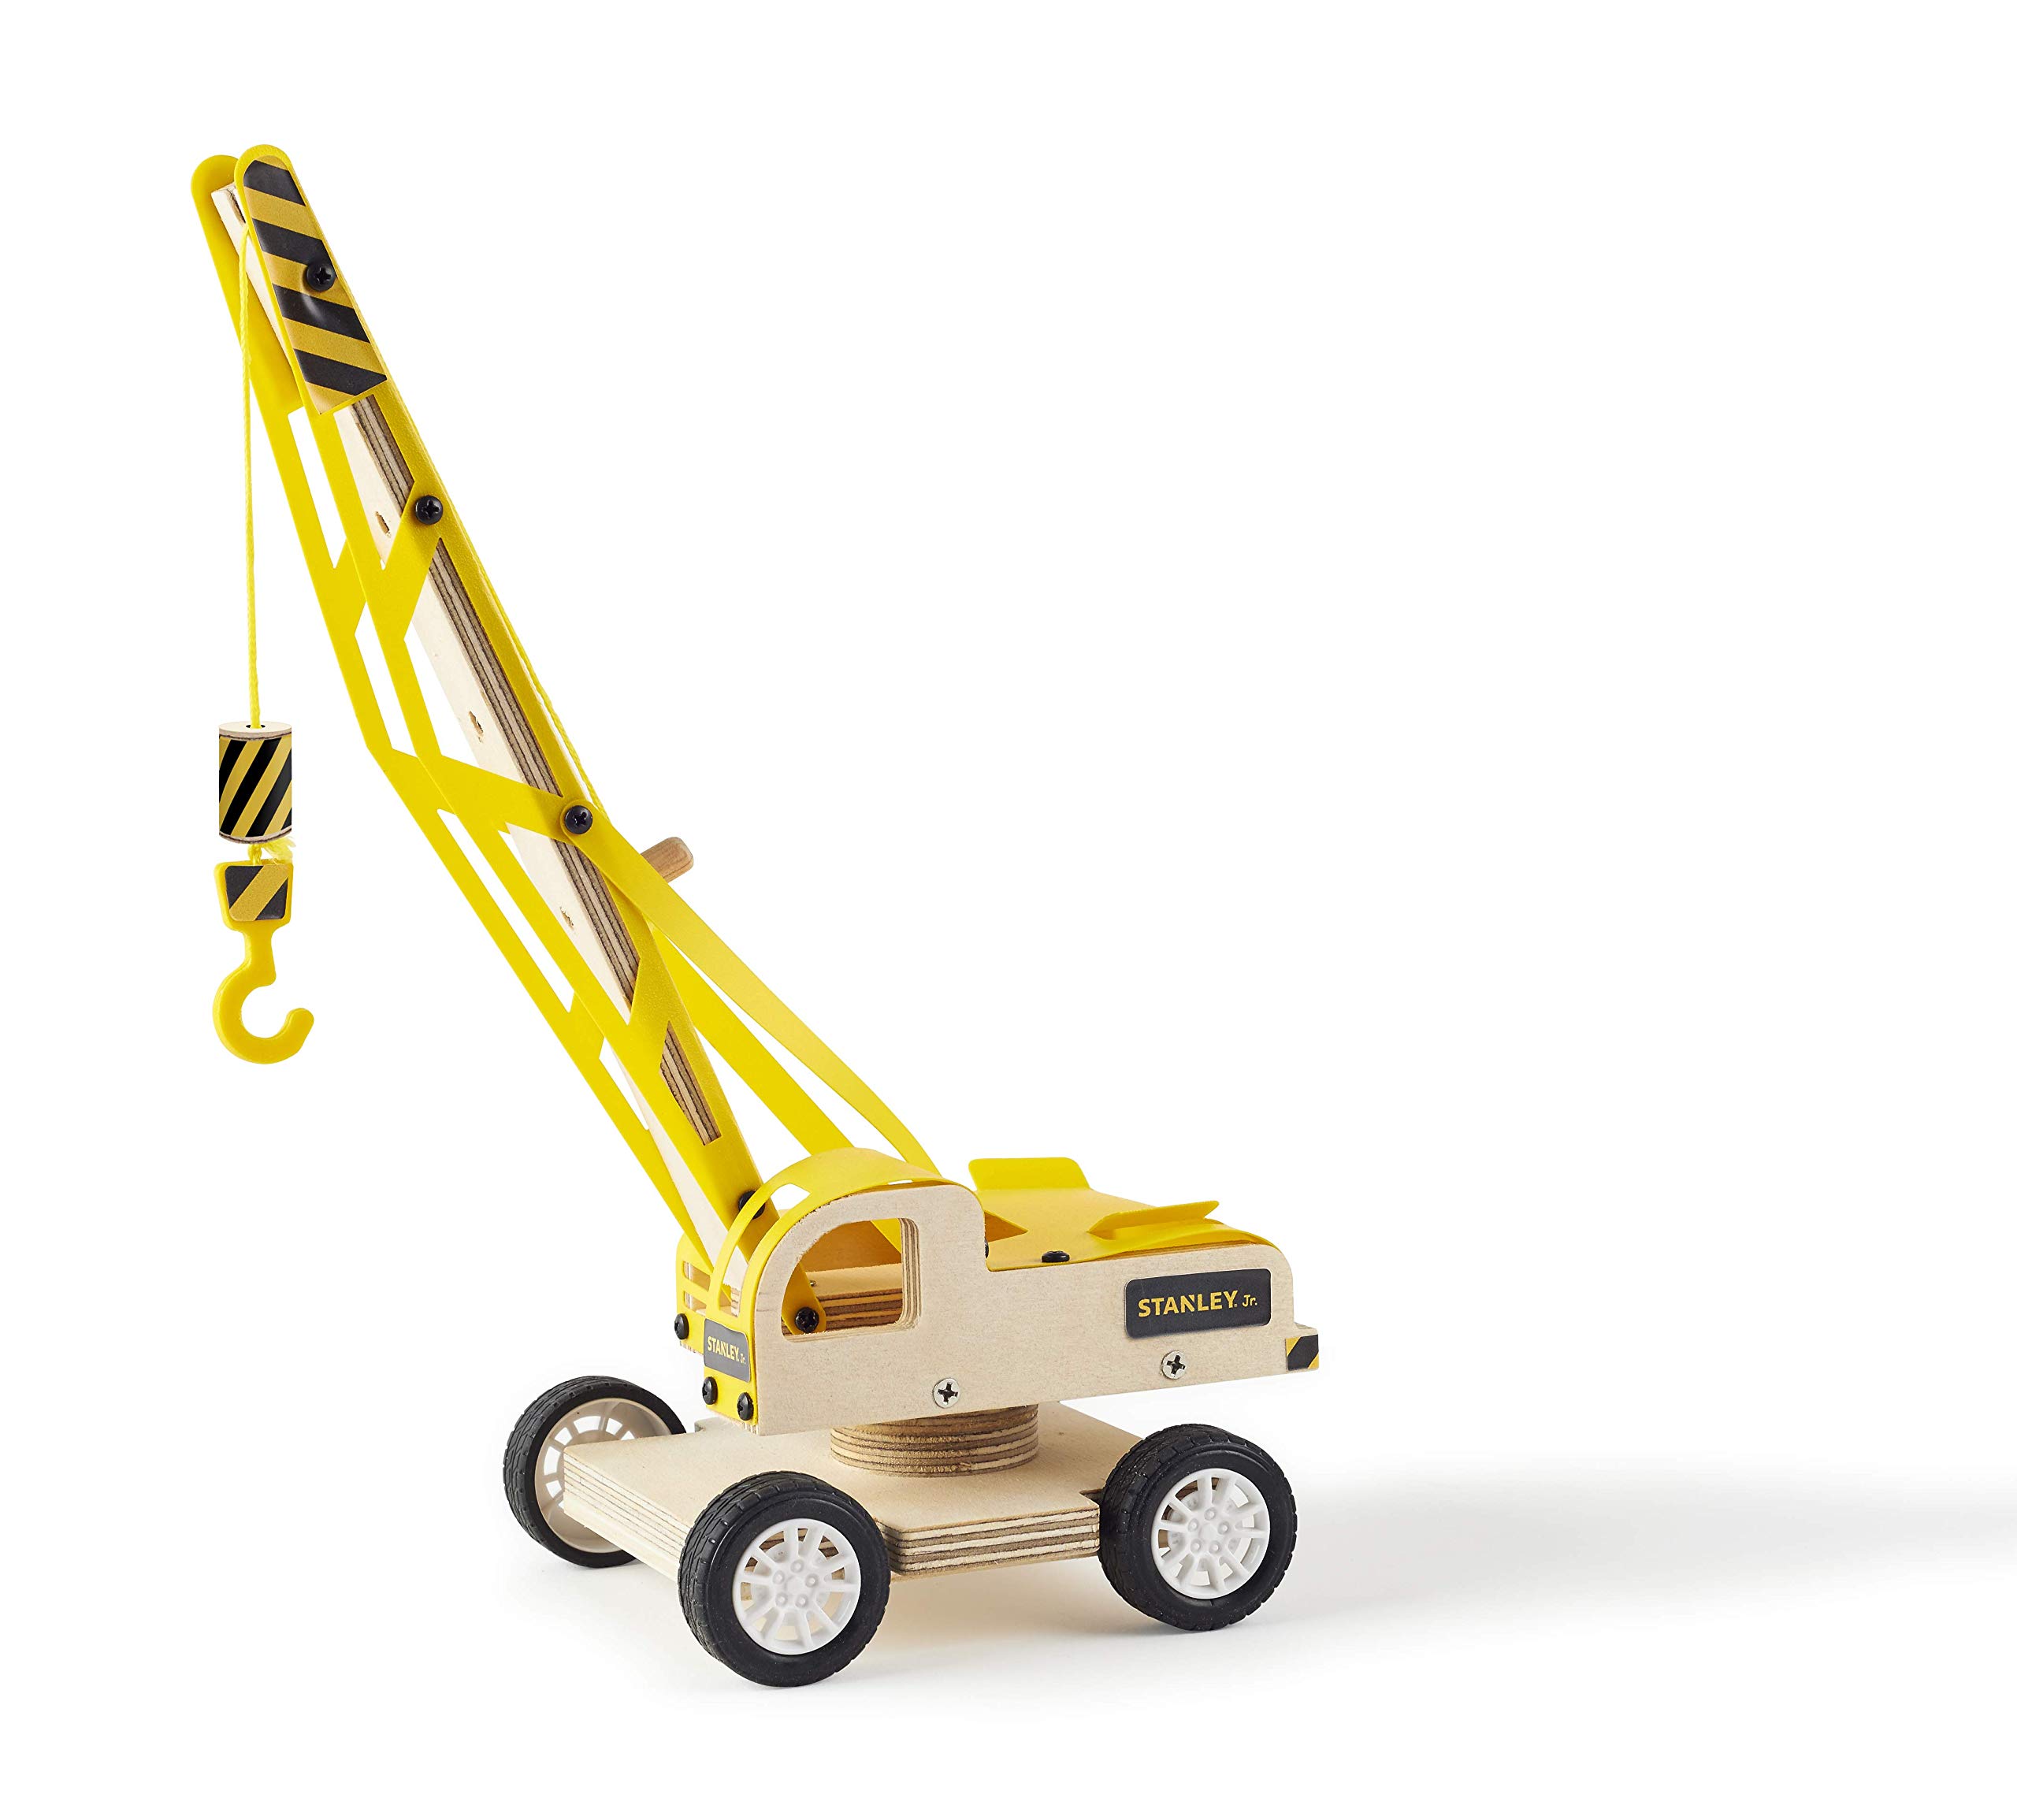 Stanley Jr. Kid's Toy Wood Lifting Crane Truck Toy Building Kit $13 + Free Shipping w/ Prime or on $35+